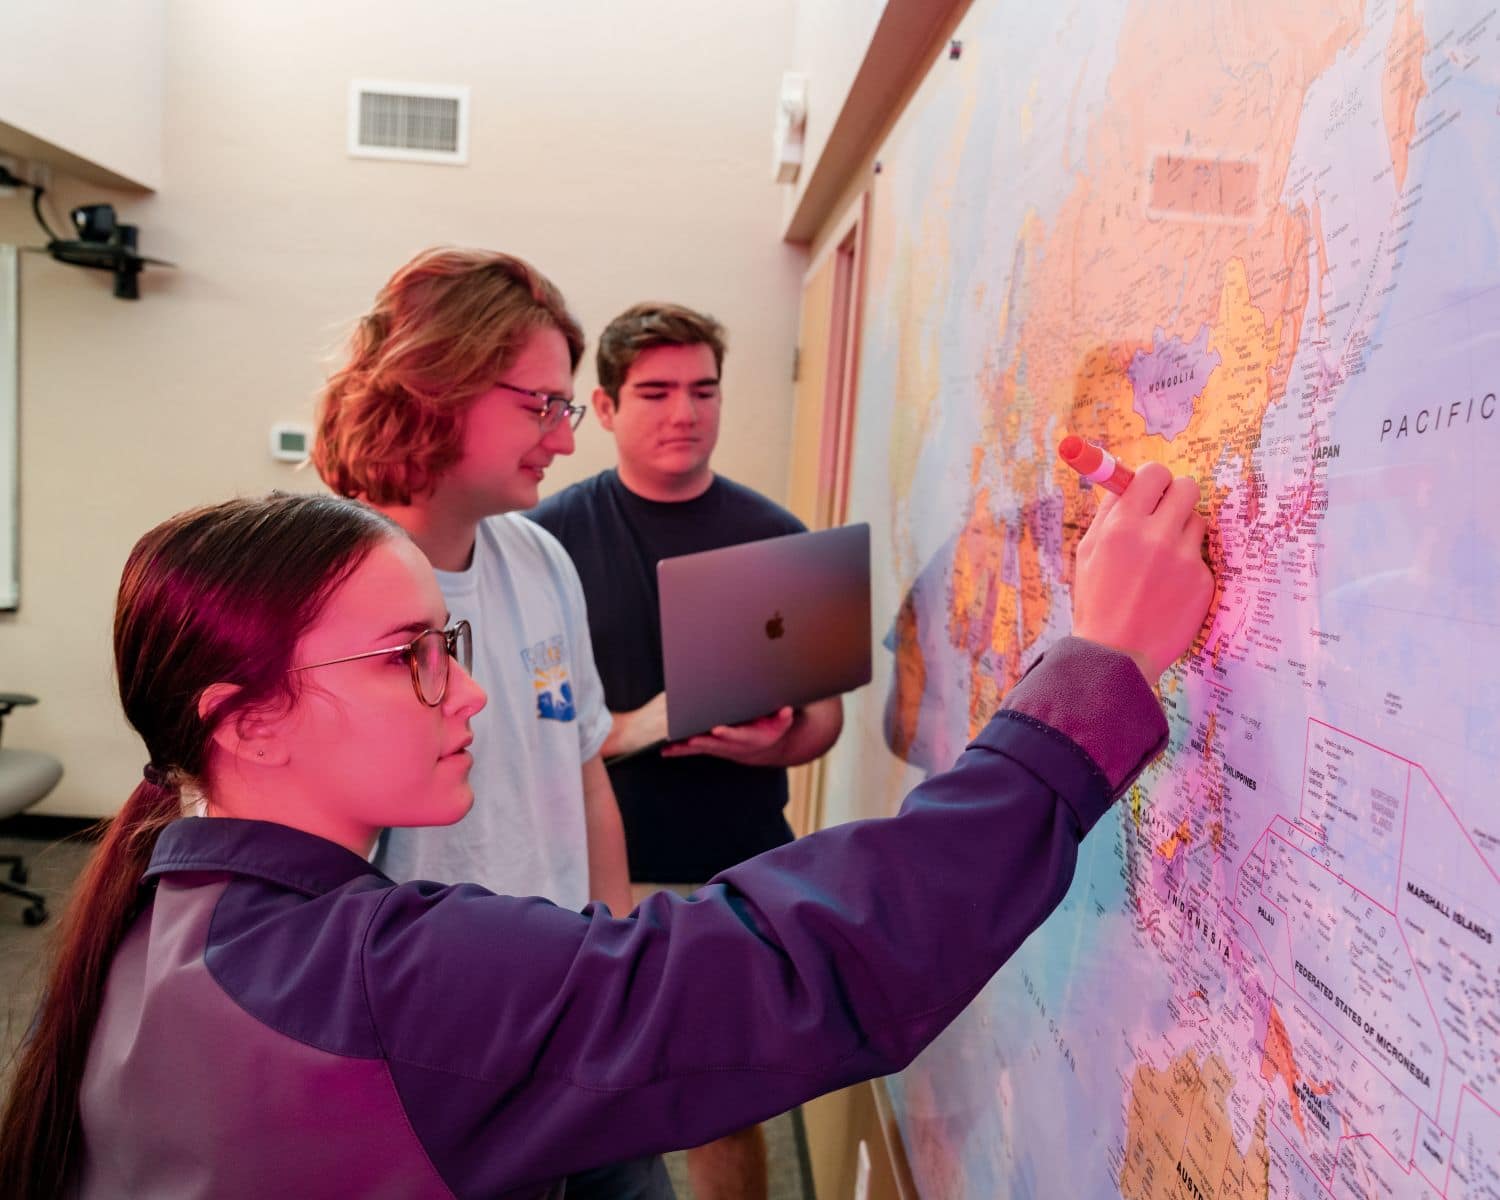 Students can even participate in clubs or organizations on campus specializing in Global Security and Intelligence, such as Eagle Eye Intelligence. (Photo: Embry-Riddle / Connor McShane)